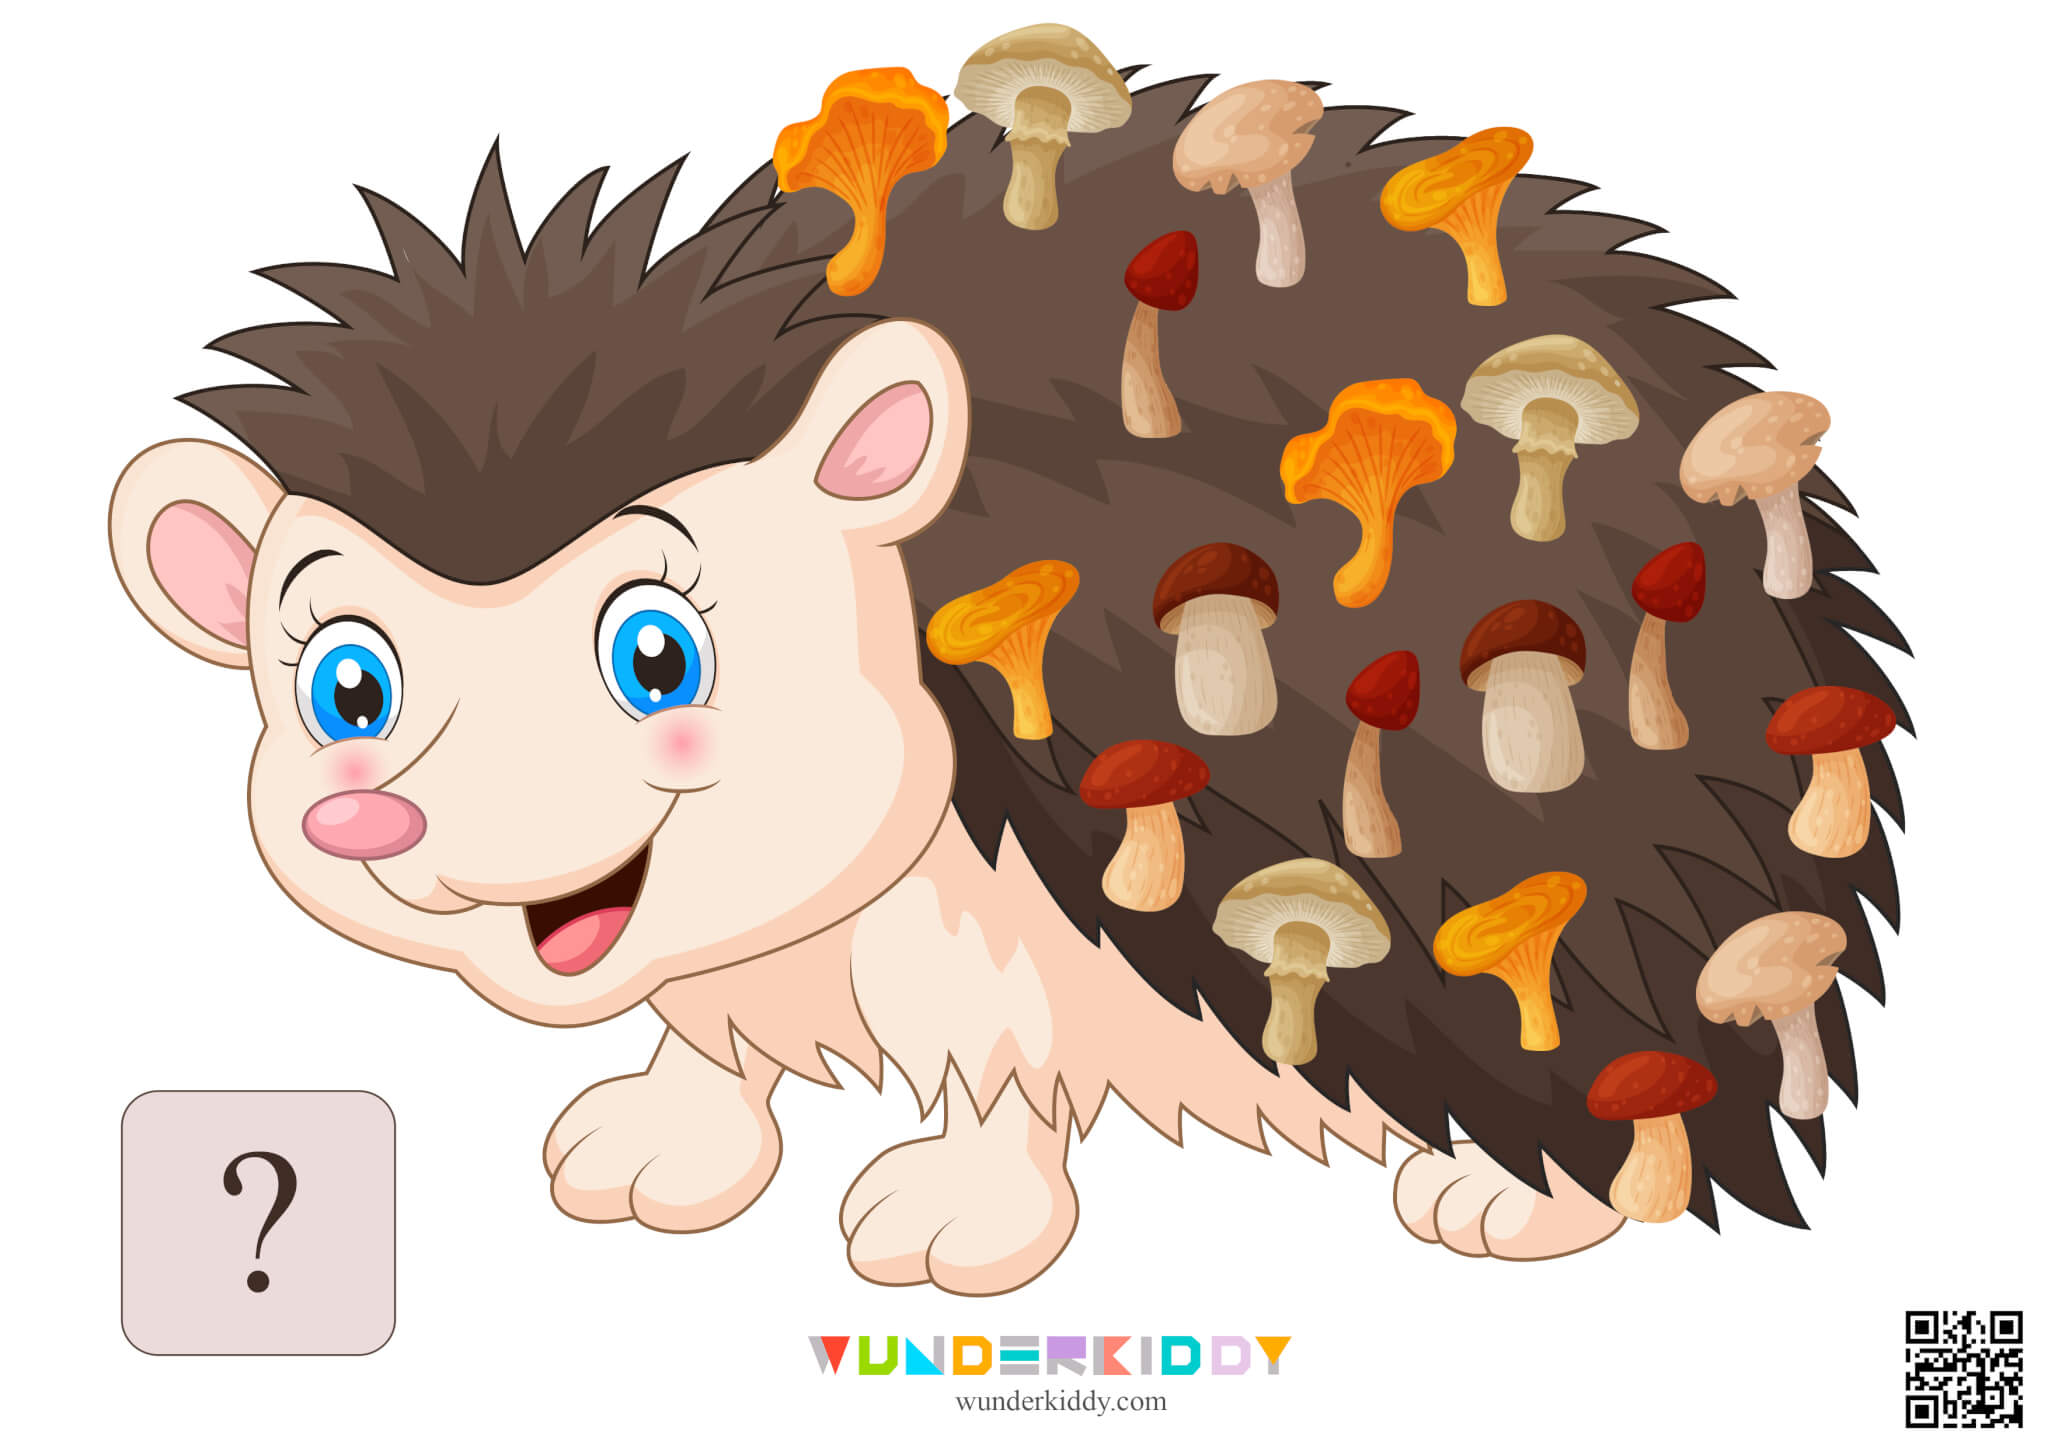 Worksheet Count to 20 with Hedgehog and Mushrooms - Image 23